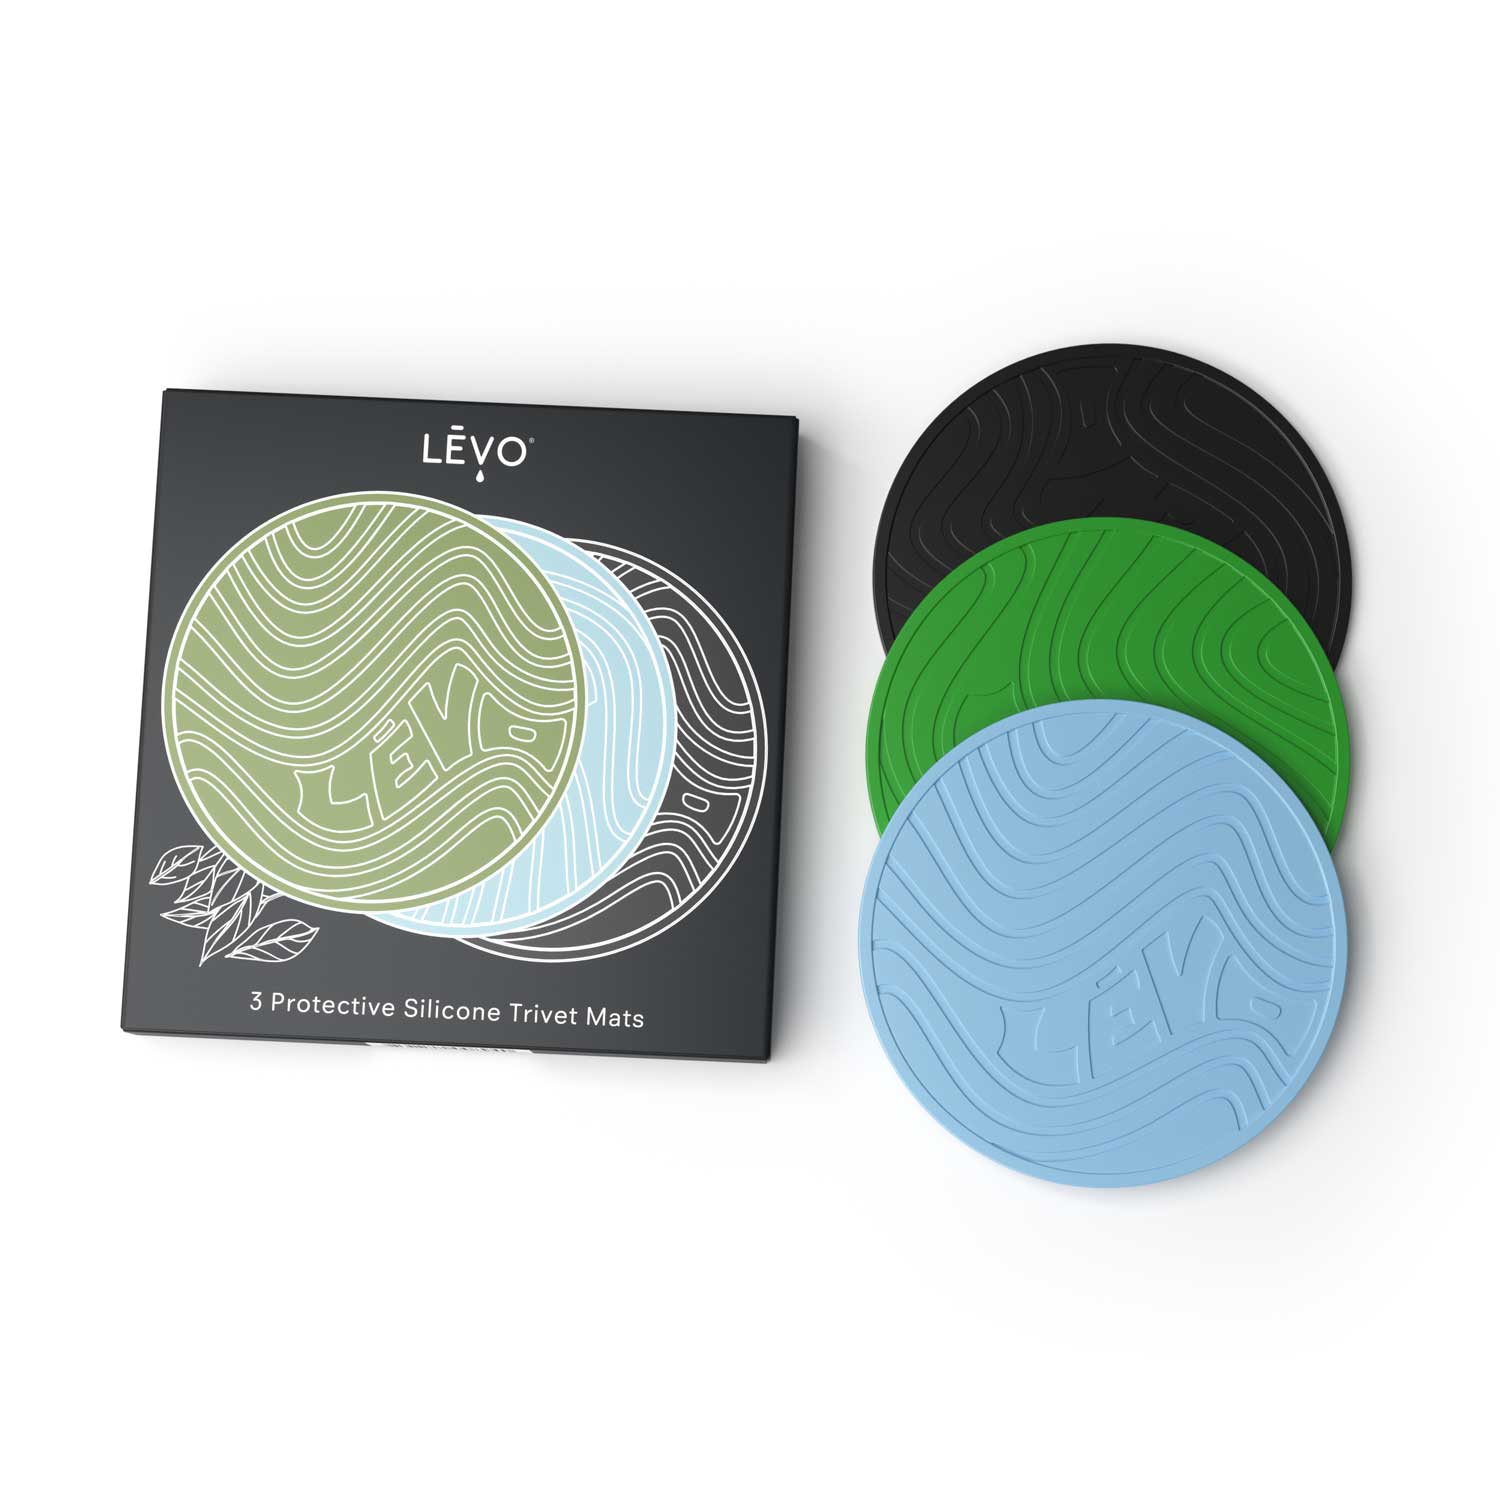 LĒVO Silicone Trivets in green, blue, and black with packaging